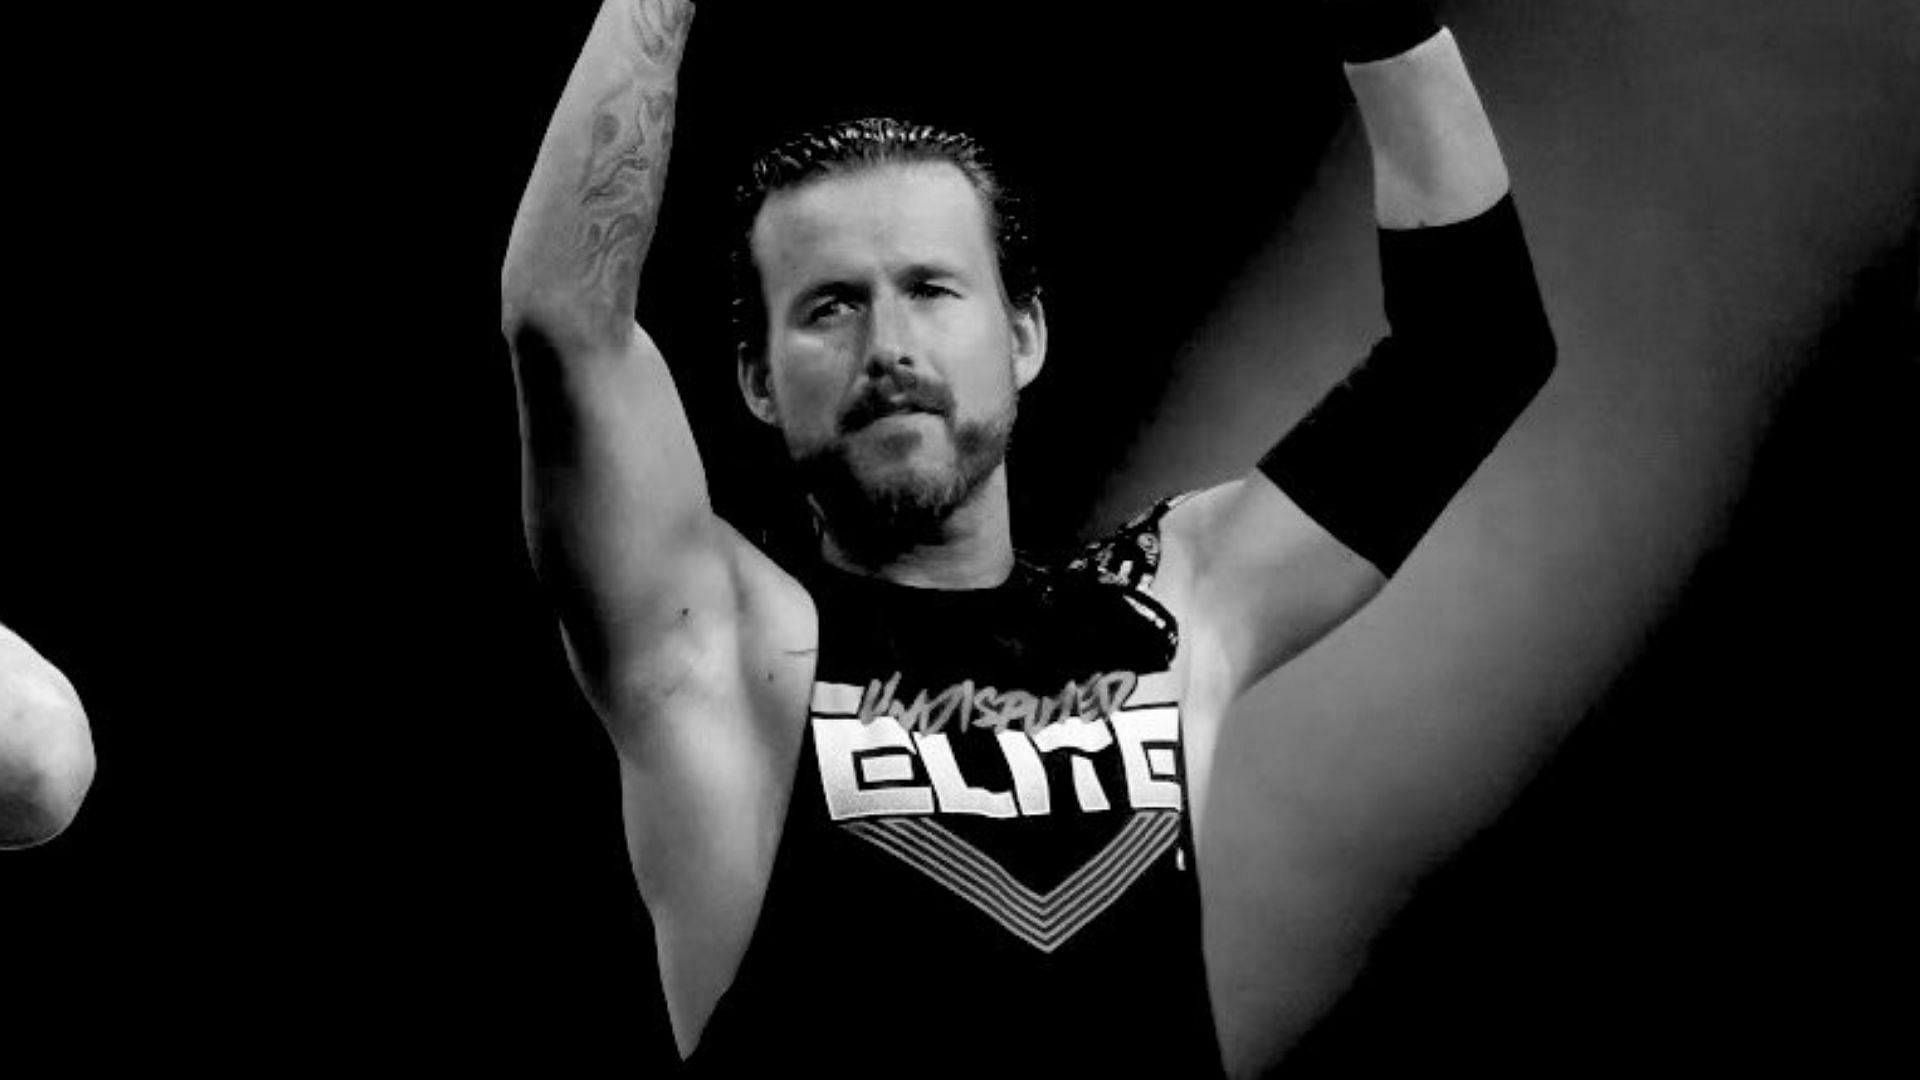 Adam Cole at an AEW Dynamite event in 2022 (credit: @kimberlasskick on Twitter)